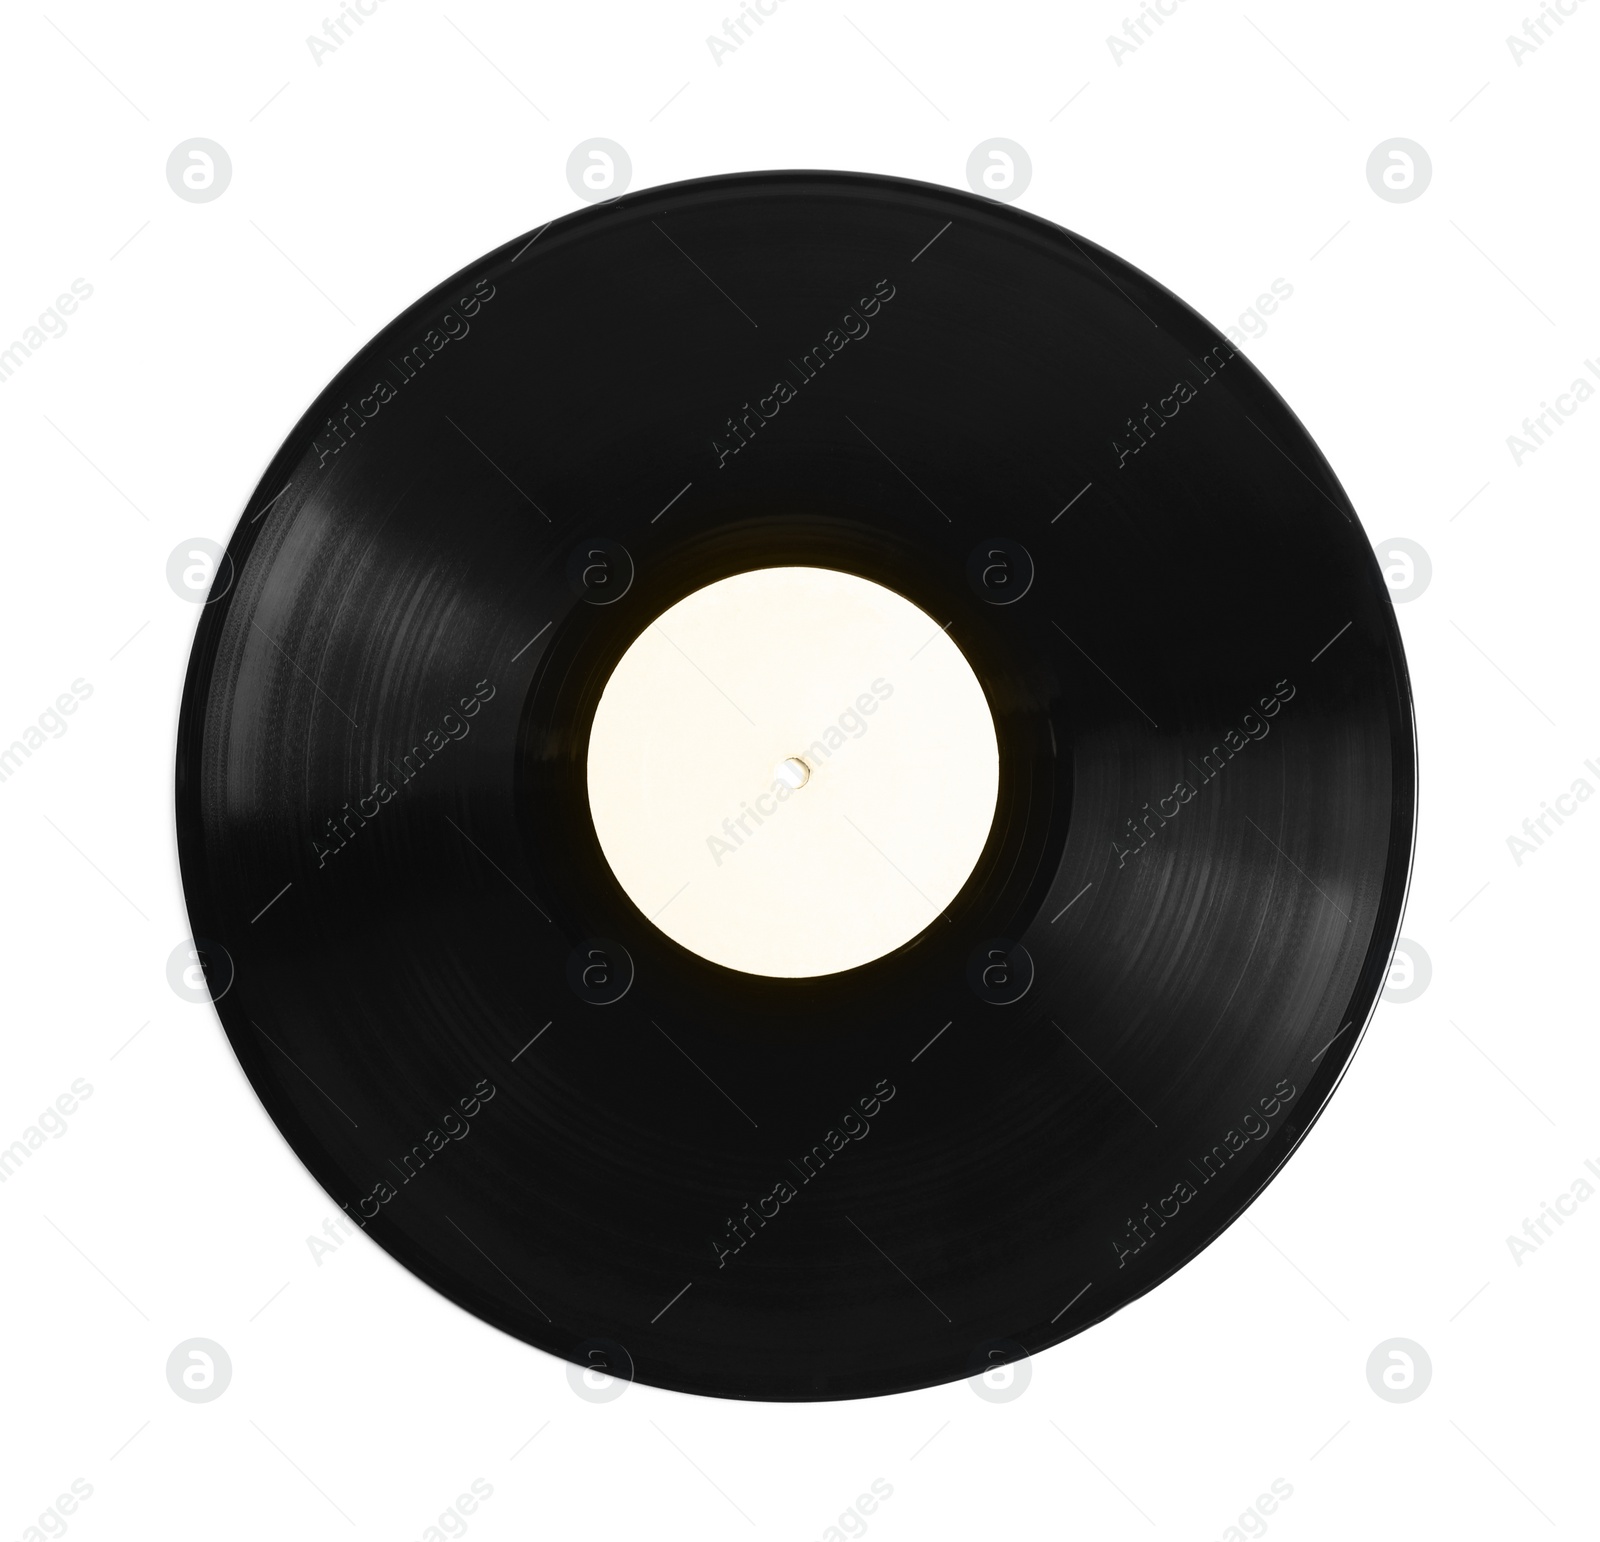 Photo of Vintage vinyl record on white background, top view